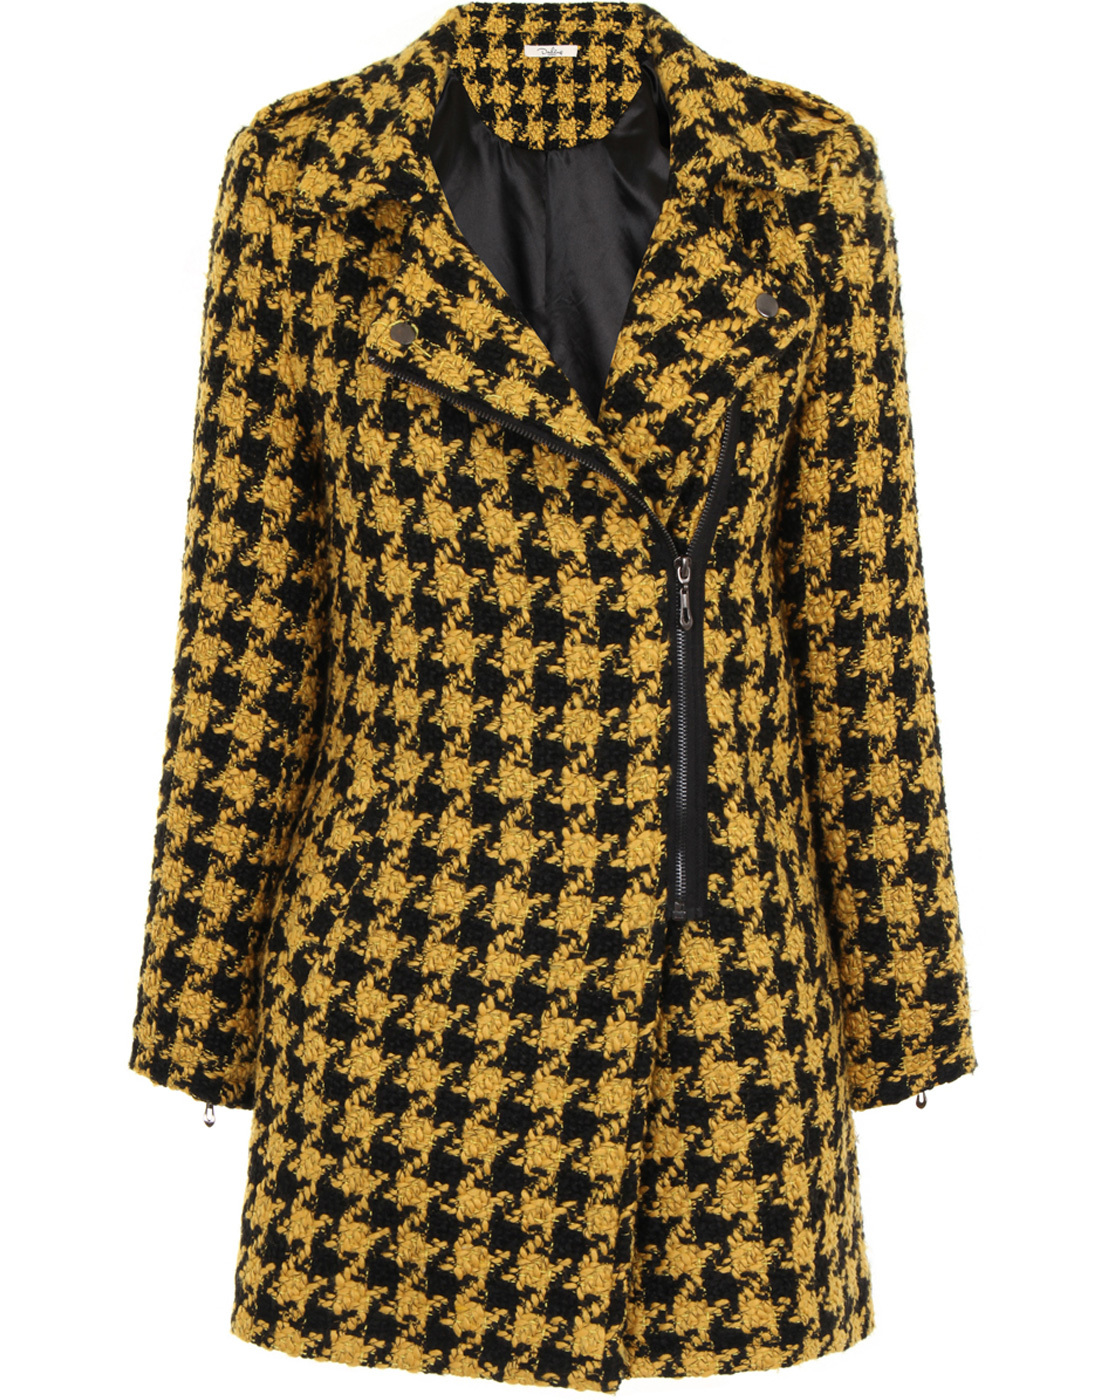 DARLING Caia Retro Sixties Mod Dogtooth Woven Coat in Mustard